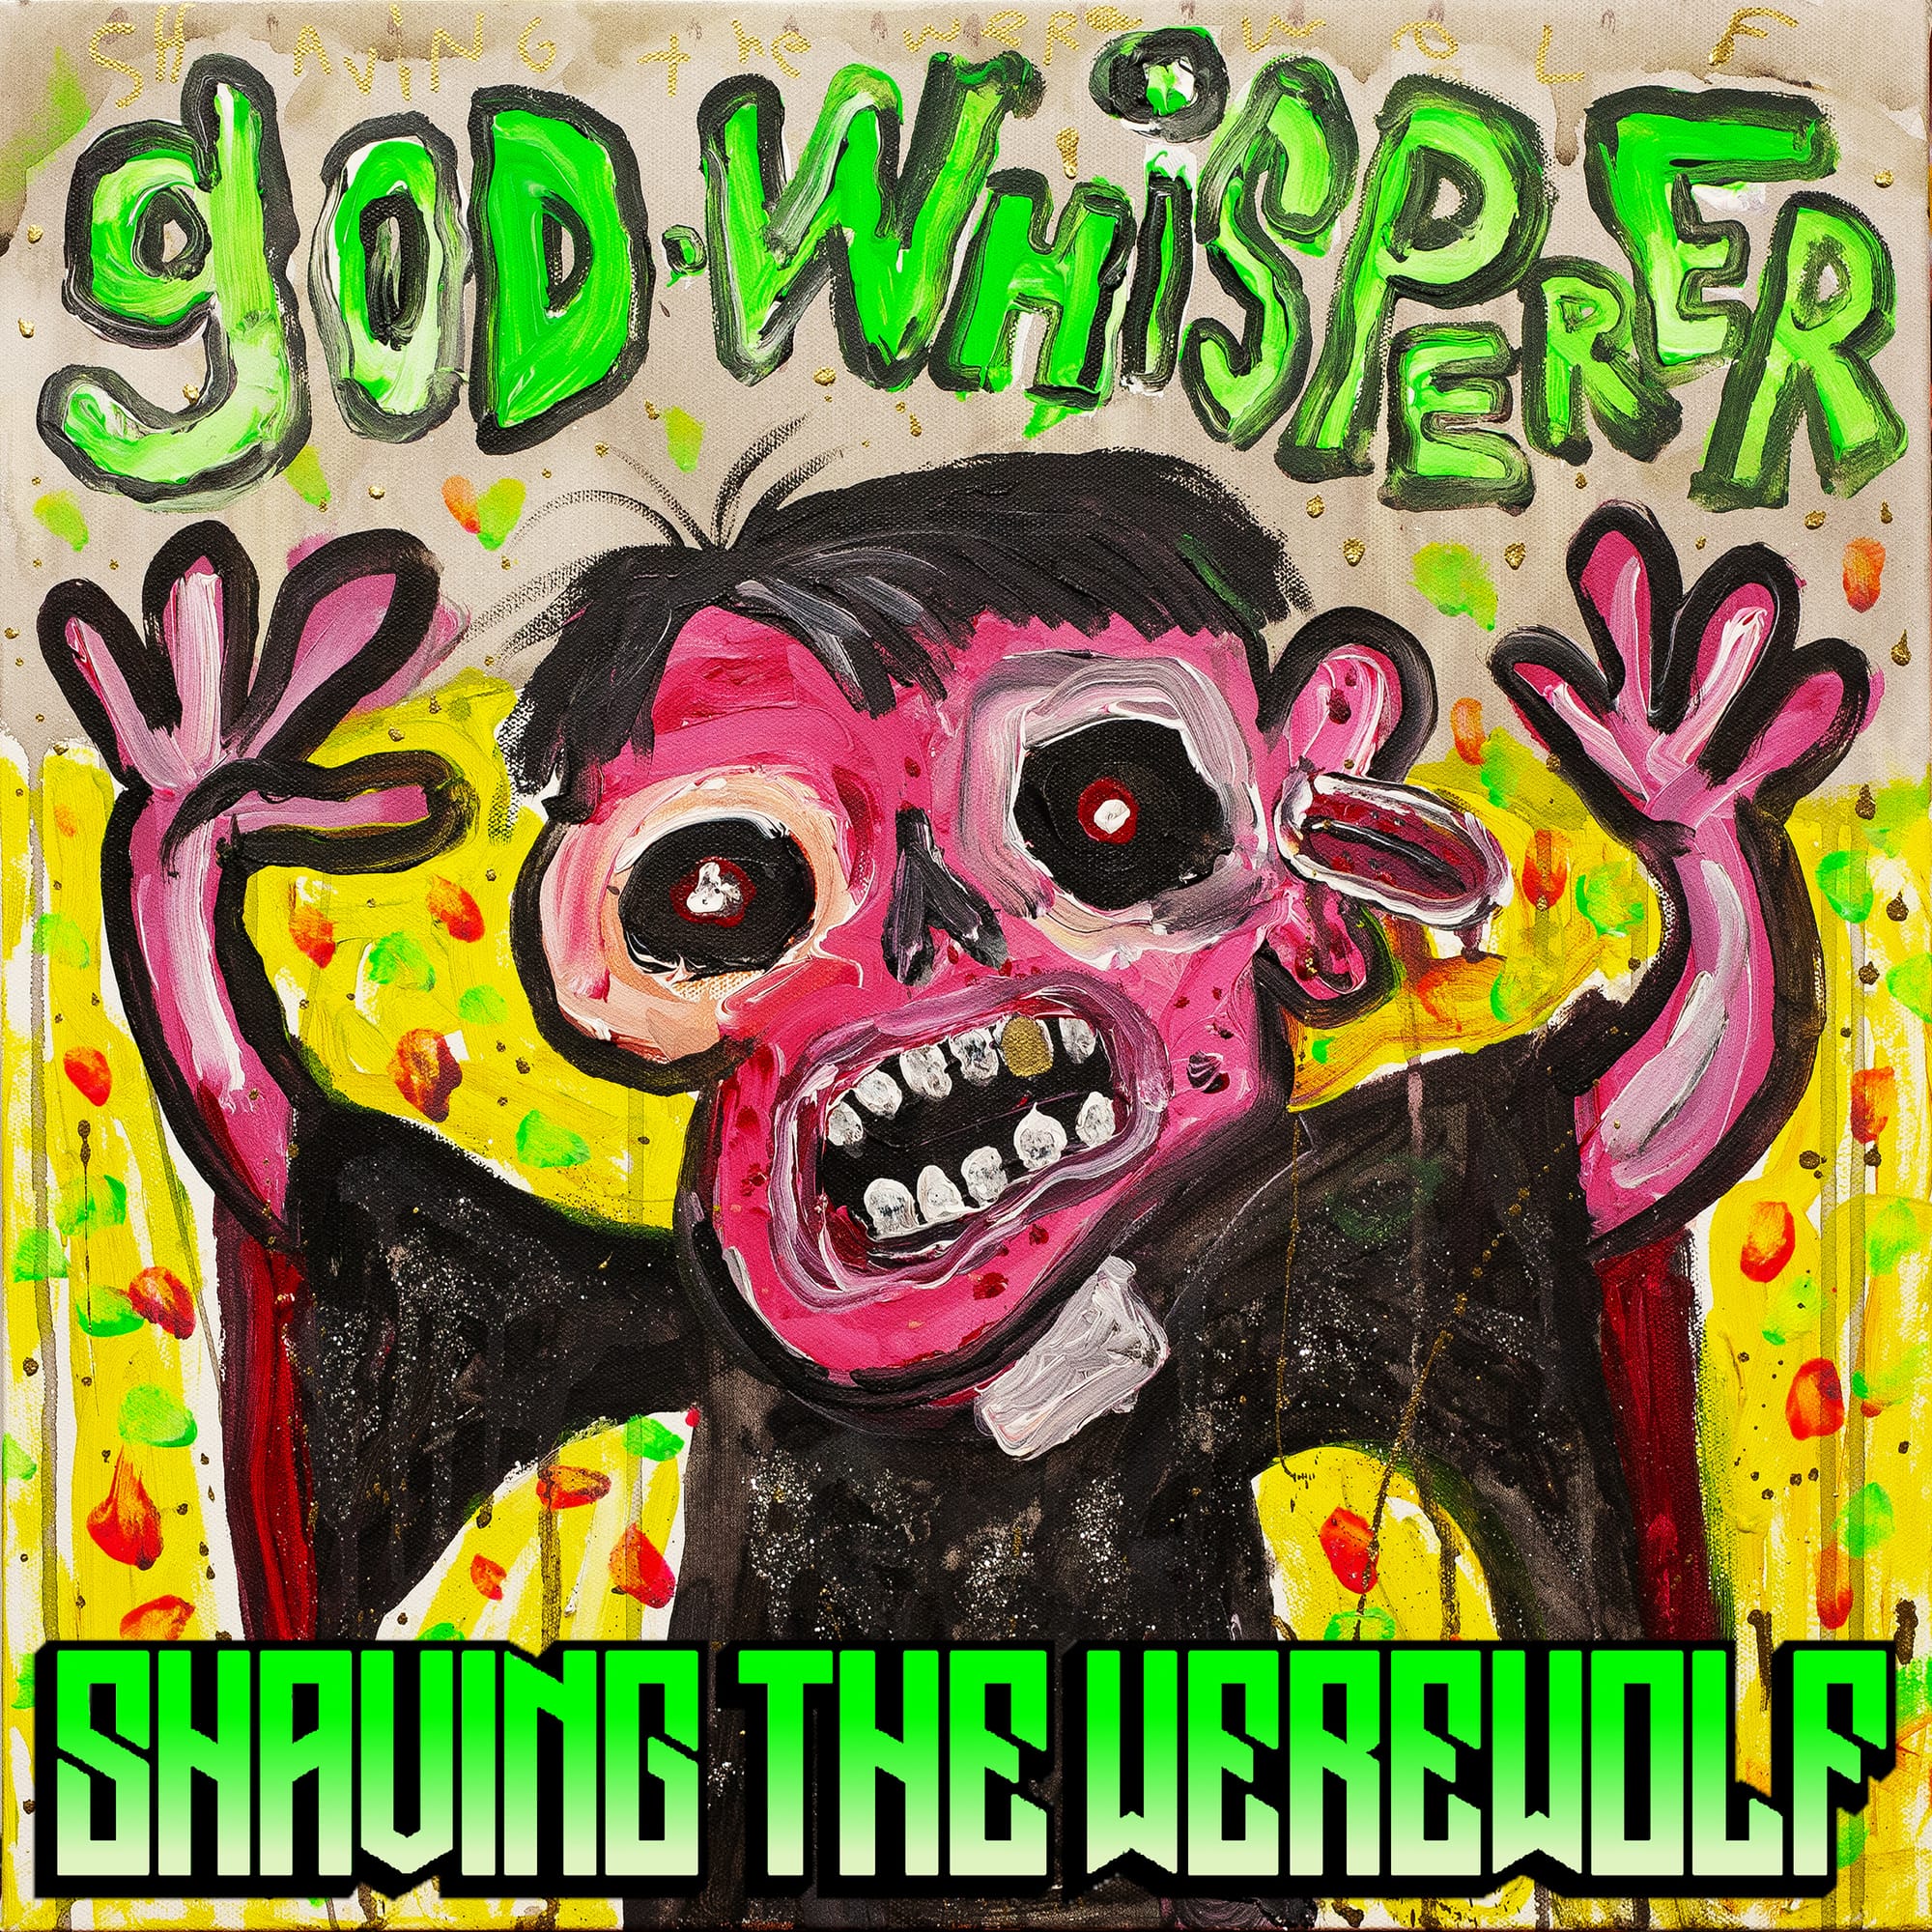 EXCLUSIVE PREMIERE: Shaving the Werewolf (that's right) Whisper to God With New Album